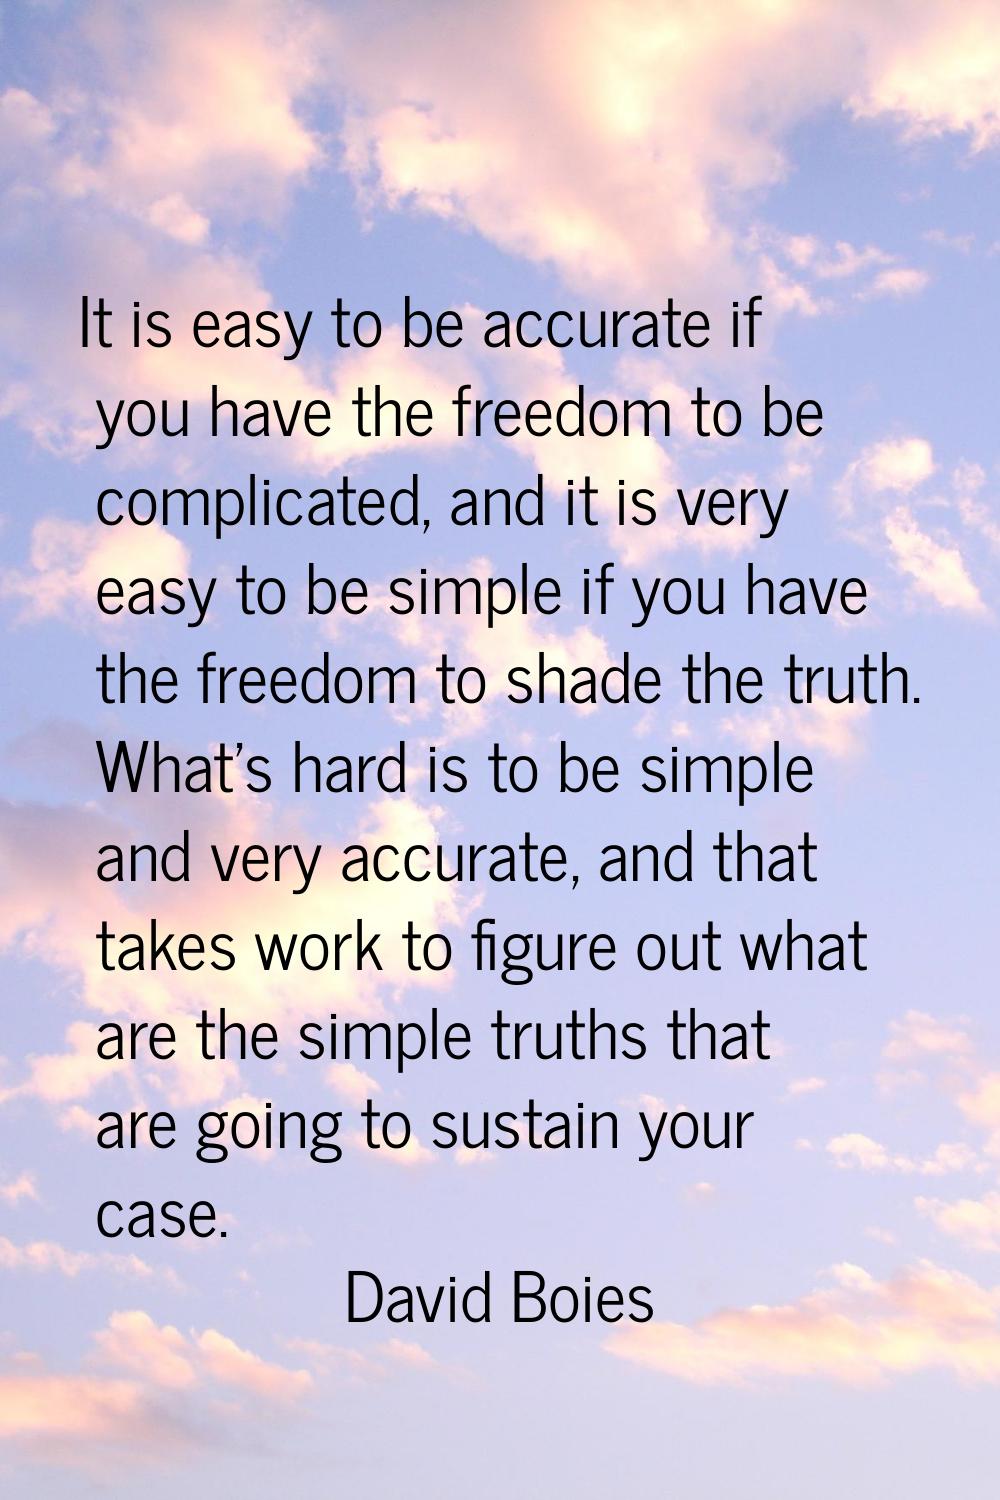 It is easy to be accurate if you have the freedom to be complicated, and it is very easy to be simp